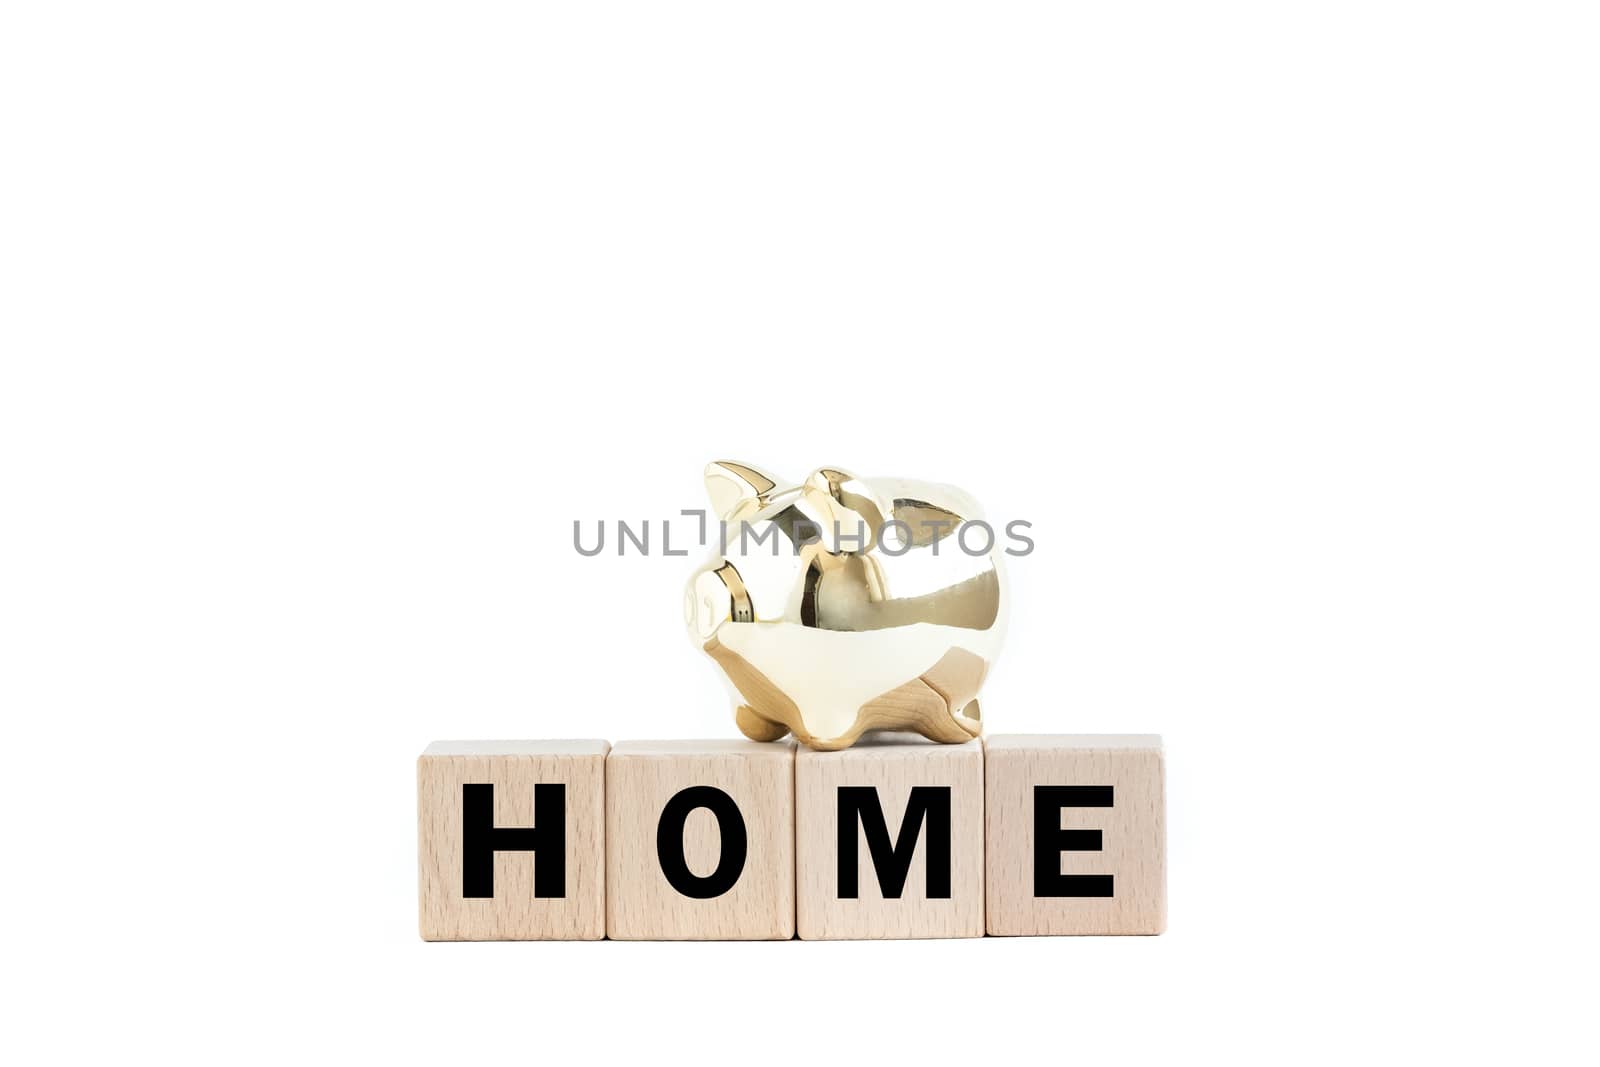 A gold piggy bank and wooden blocks with text. Isolated on white background. Home concept.